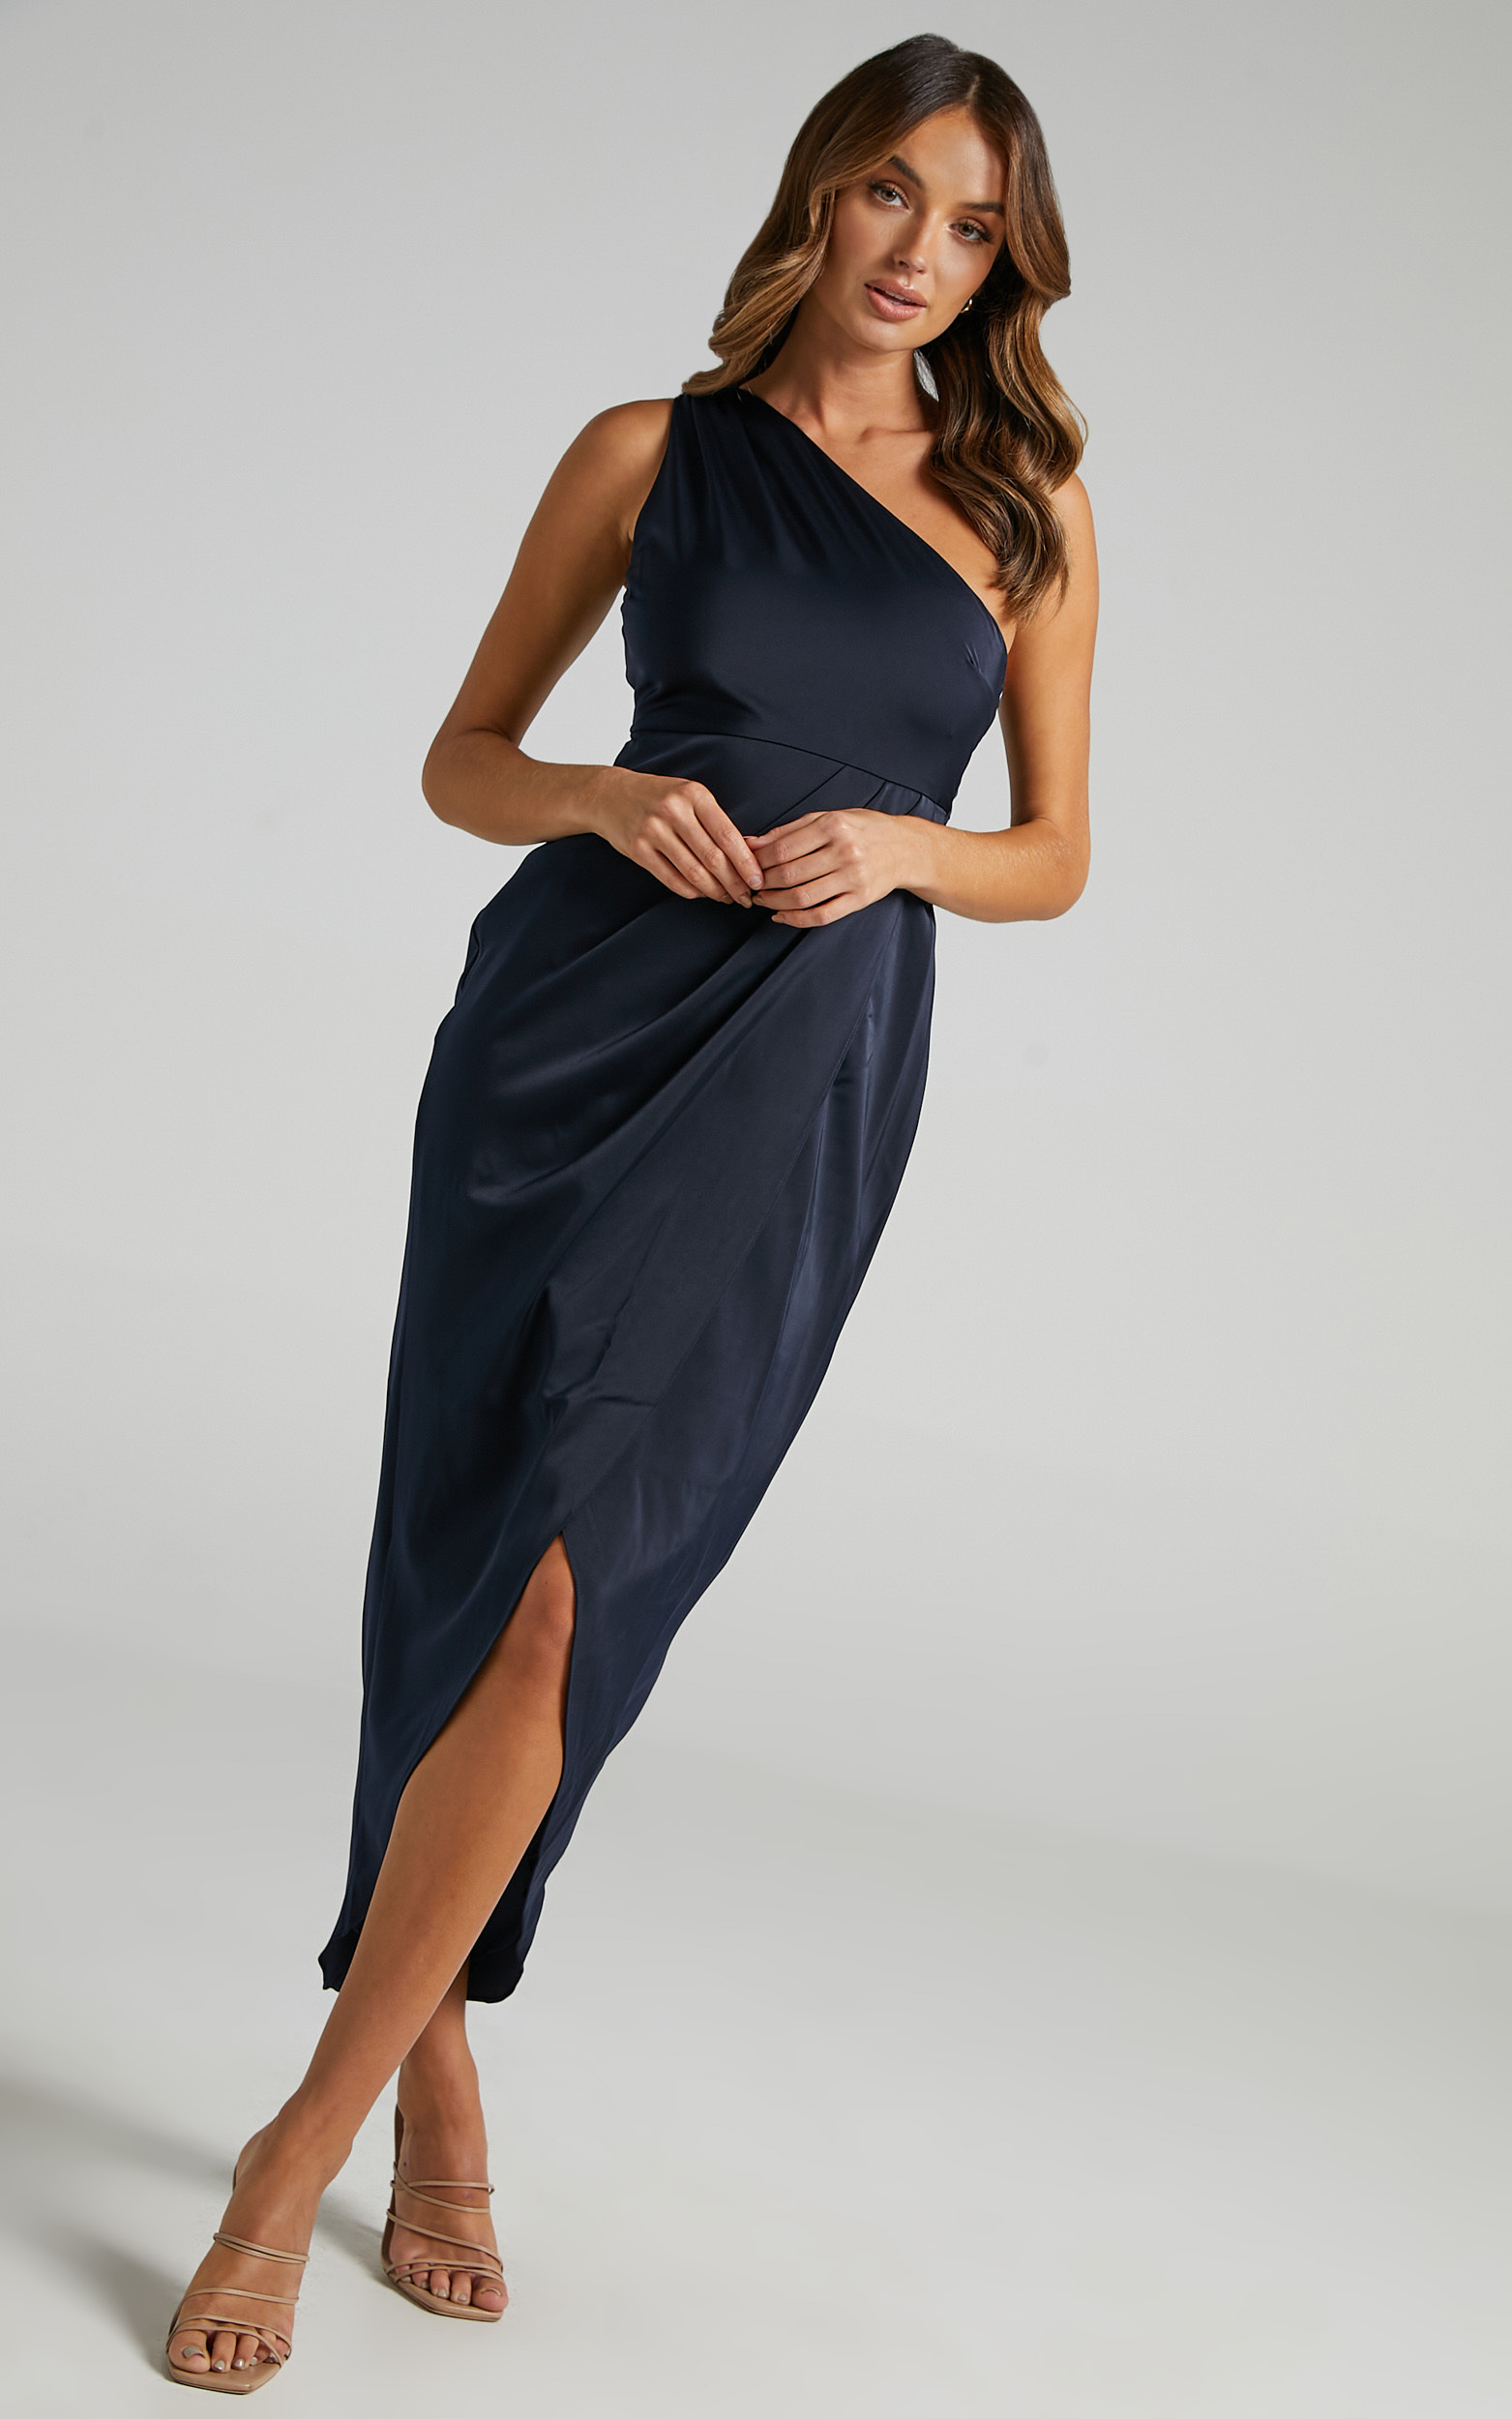 Felt So Happy Dress in Navy - 20, NVY2, hi-res image number null